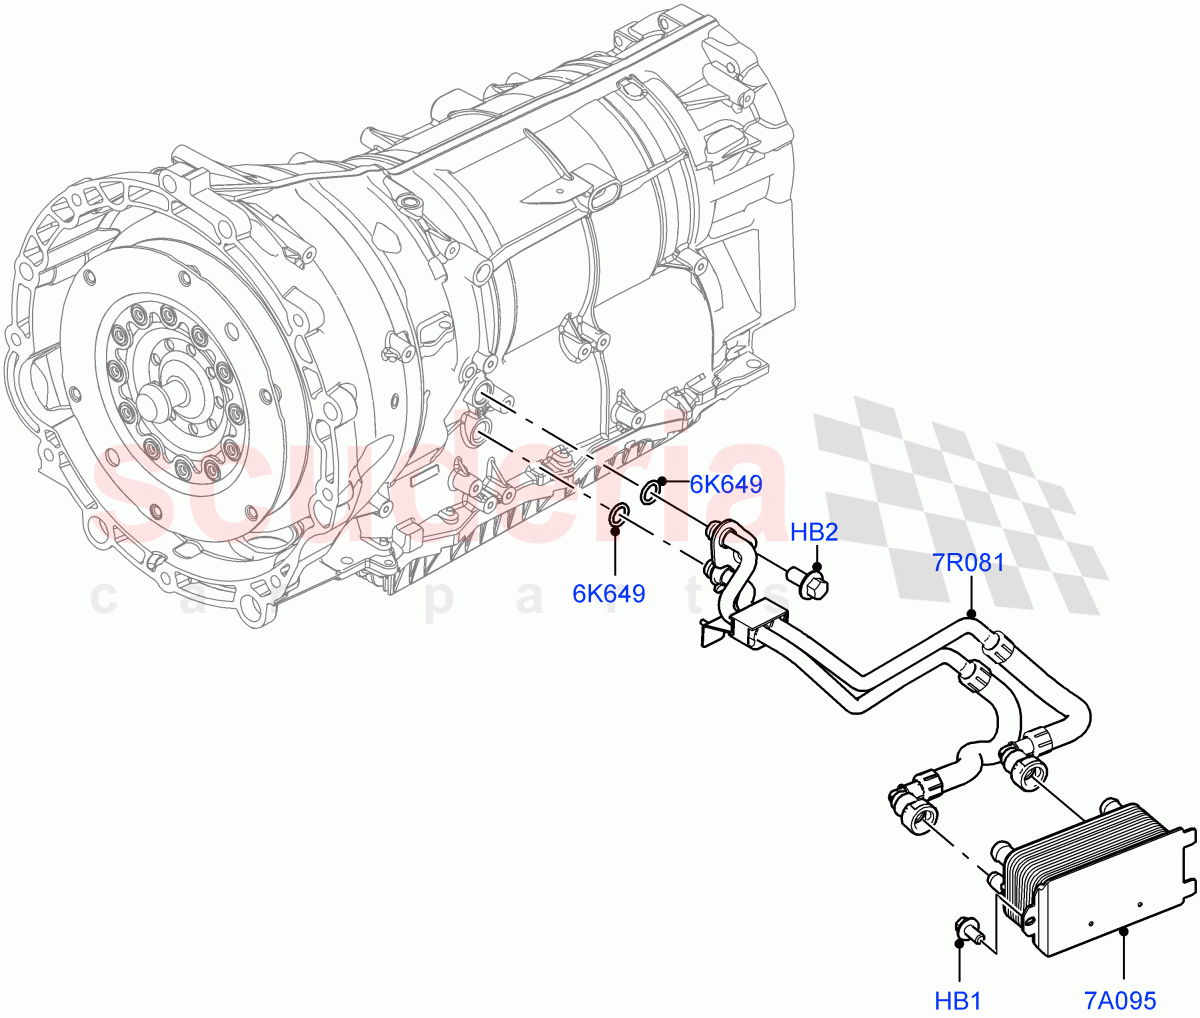 Transmission Cooling Systems(3.0L AJ20P6 Petrol High,8 Speed Auto Trans ZF 8HP76,3.0L AJ20D6 Diesel High)((V)FROMKA000001) of Land Rover Land Rover Range Rover (2012-2021) [2.0 Turbo Petrol AJ200P]